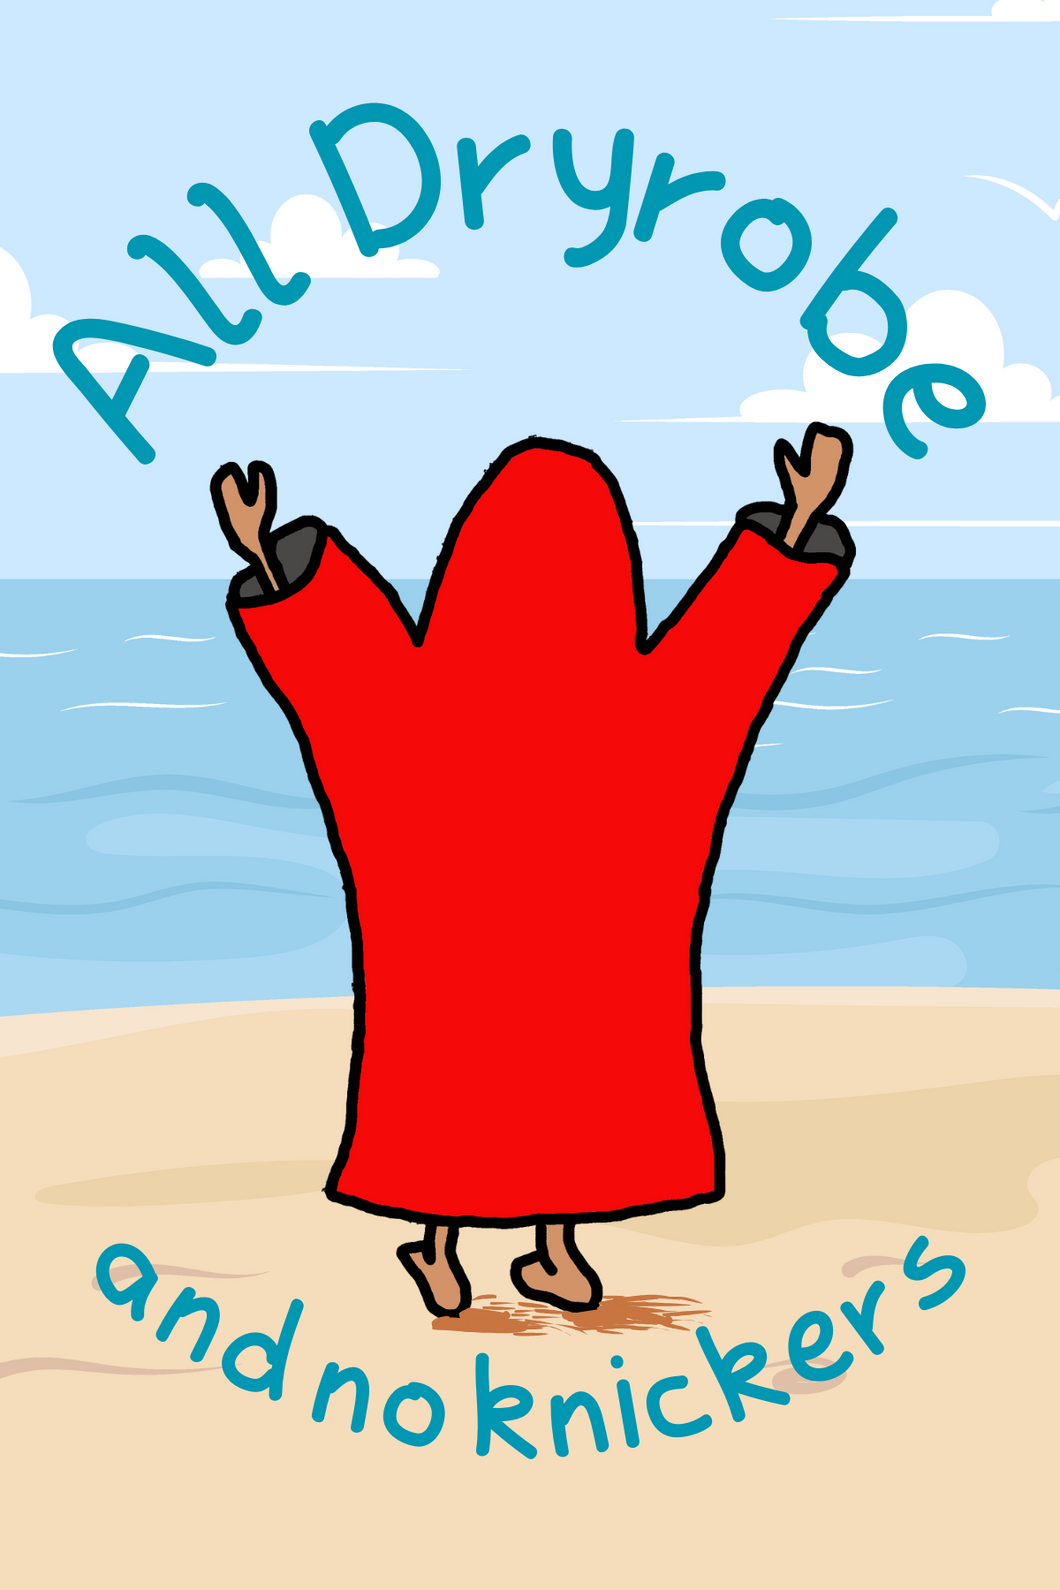 All dryrobe and no knickers greeting card